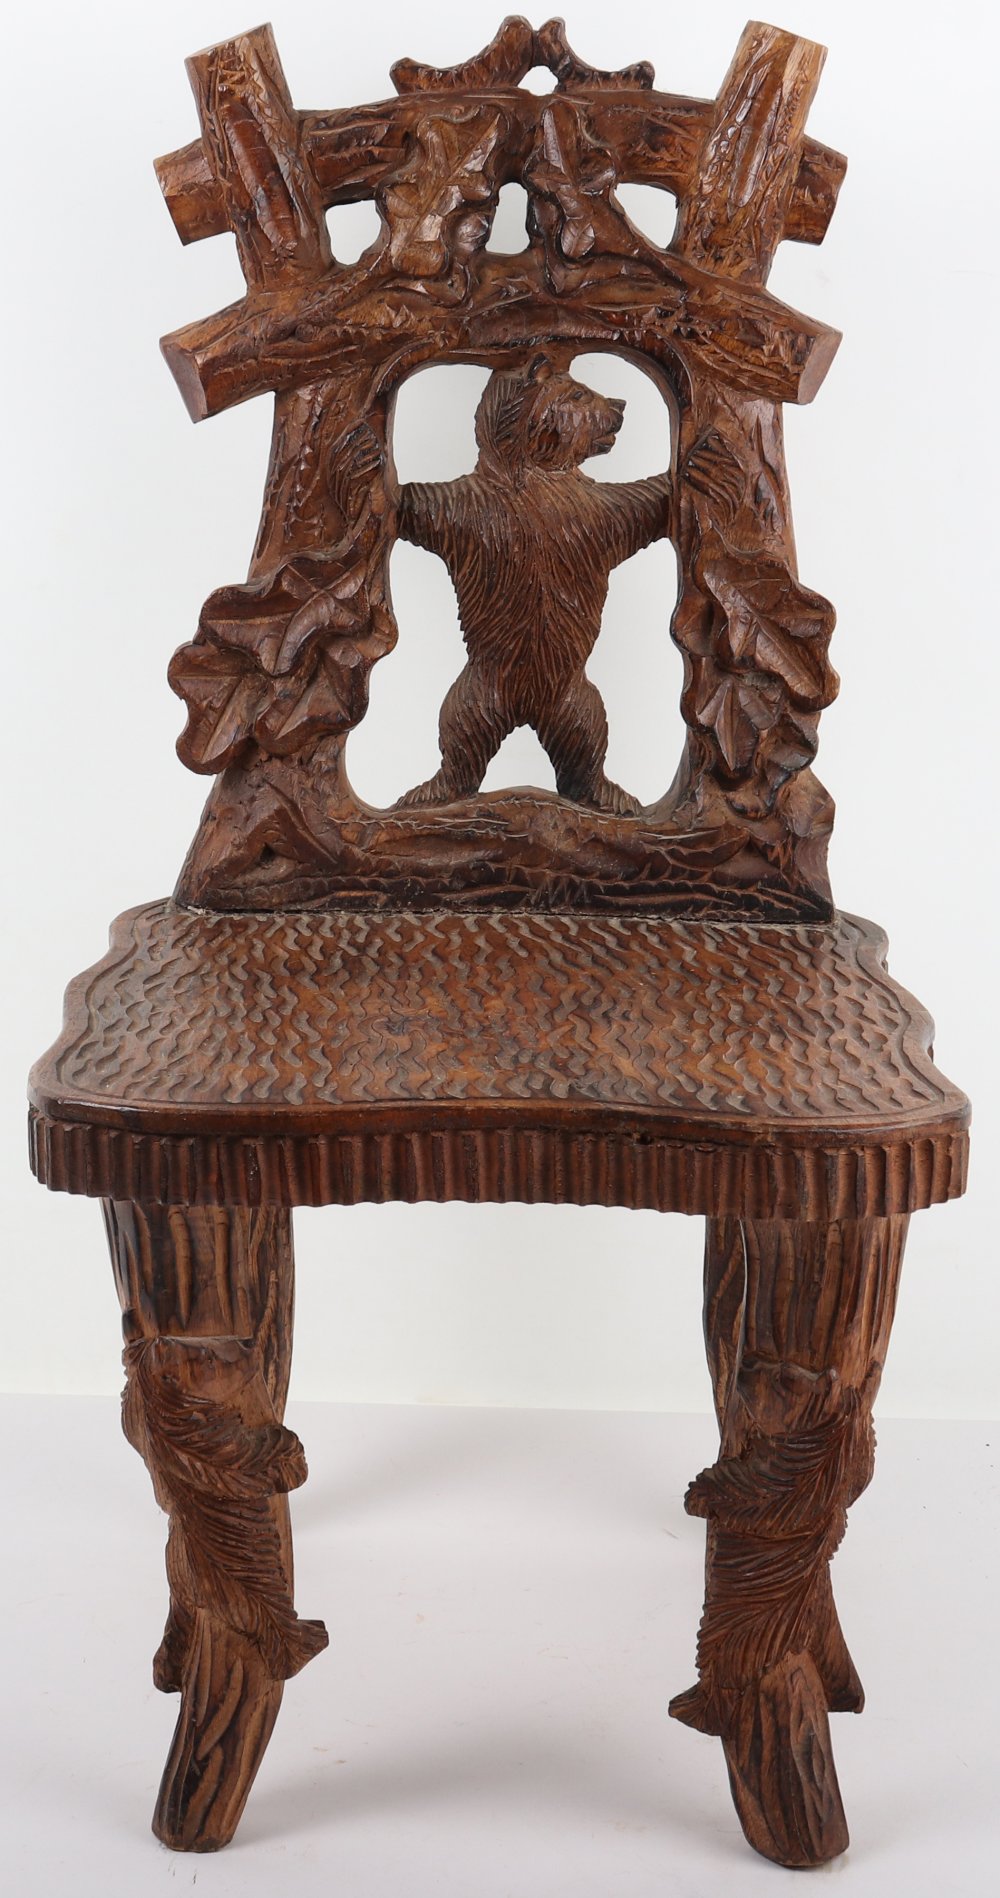 A Black Forest carved child’s chair